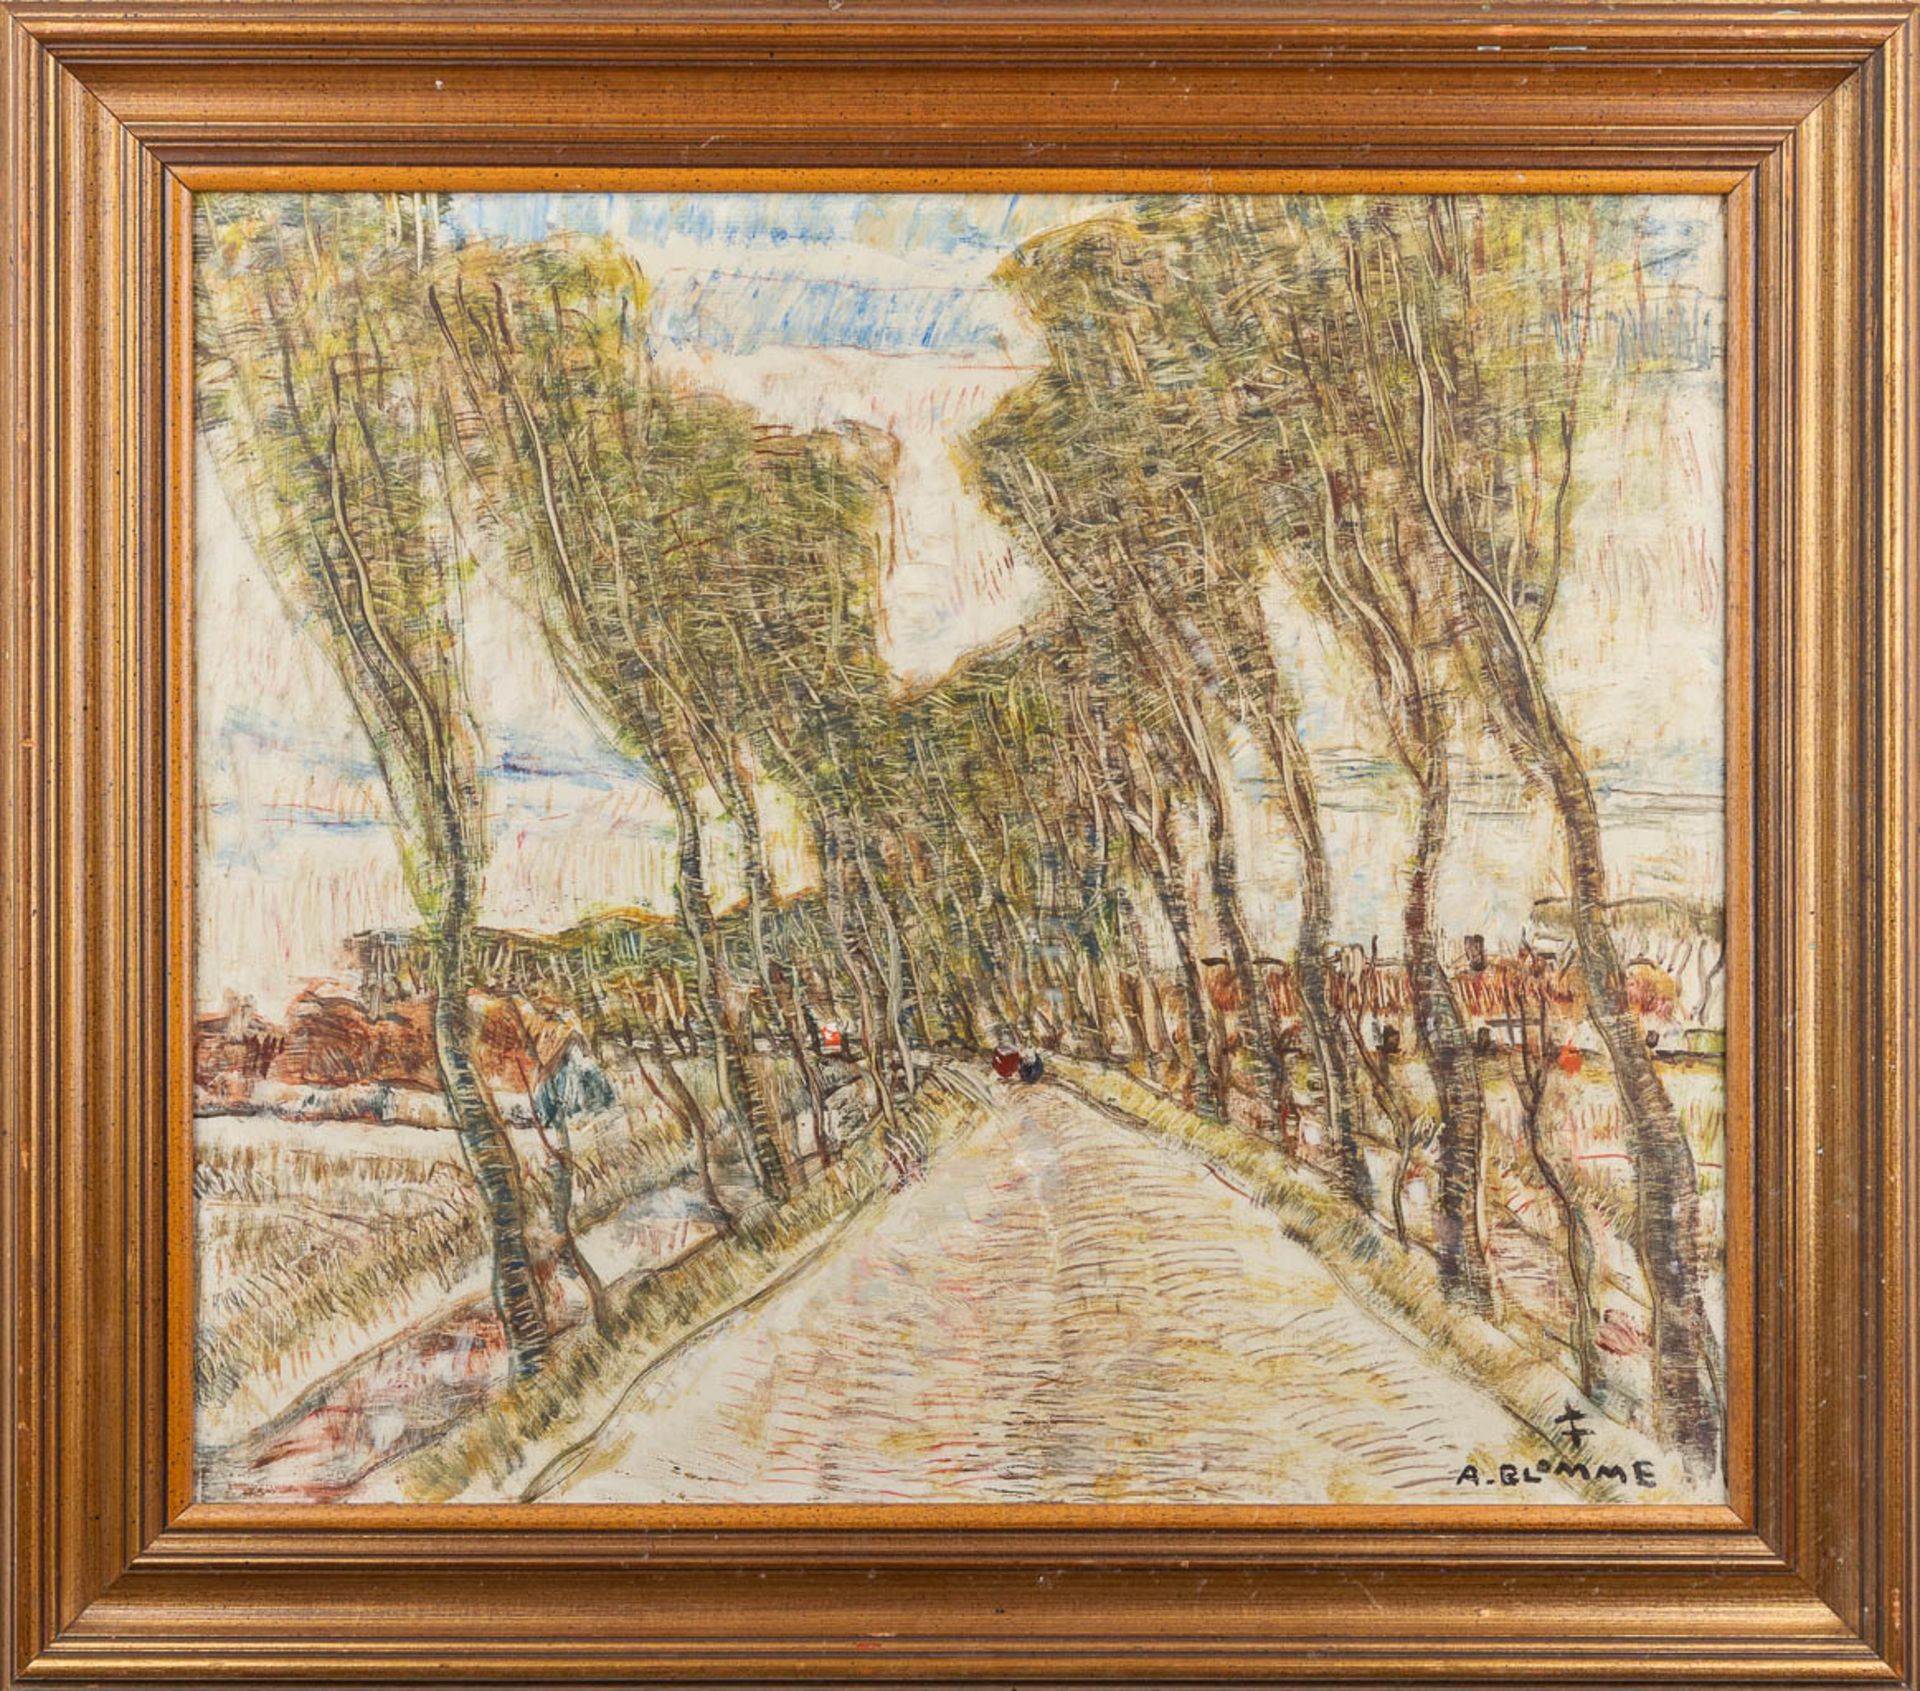 Alfons BLOMME (1889-1979) 'View of a road' oil on board. (W: 70 x H: 60 cm) - Image 3 of 6